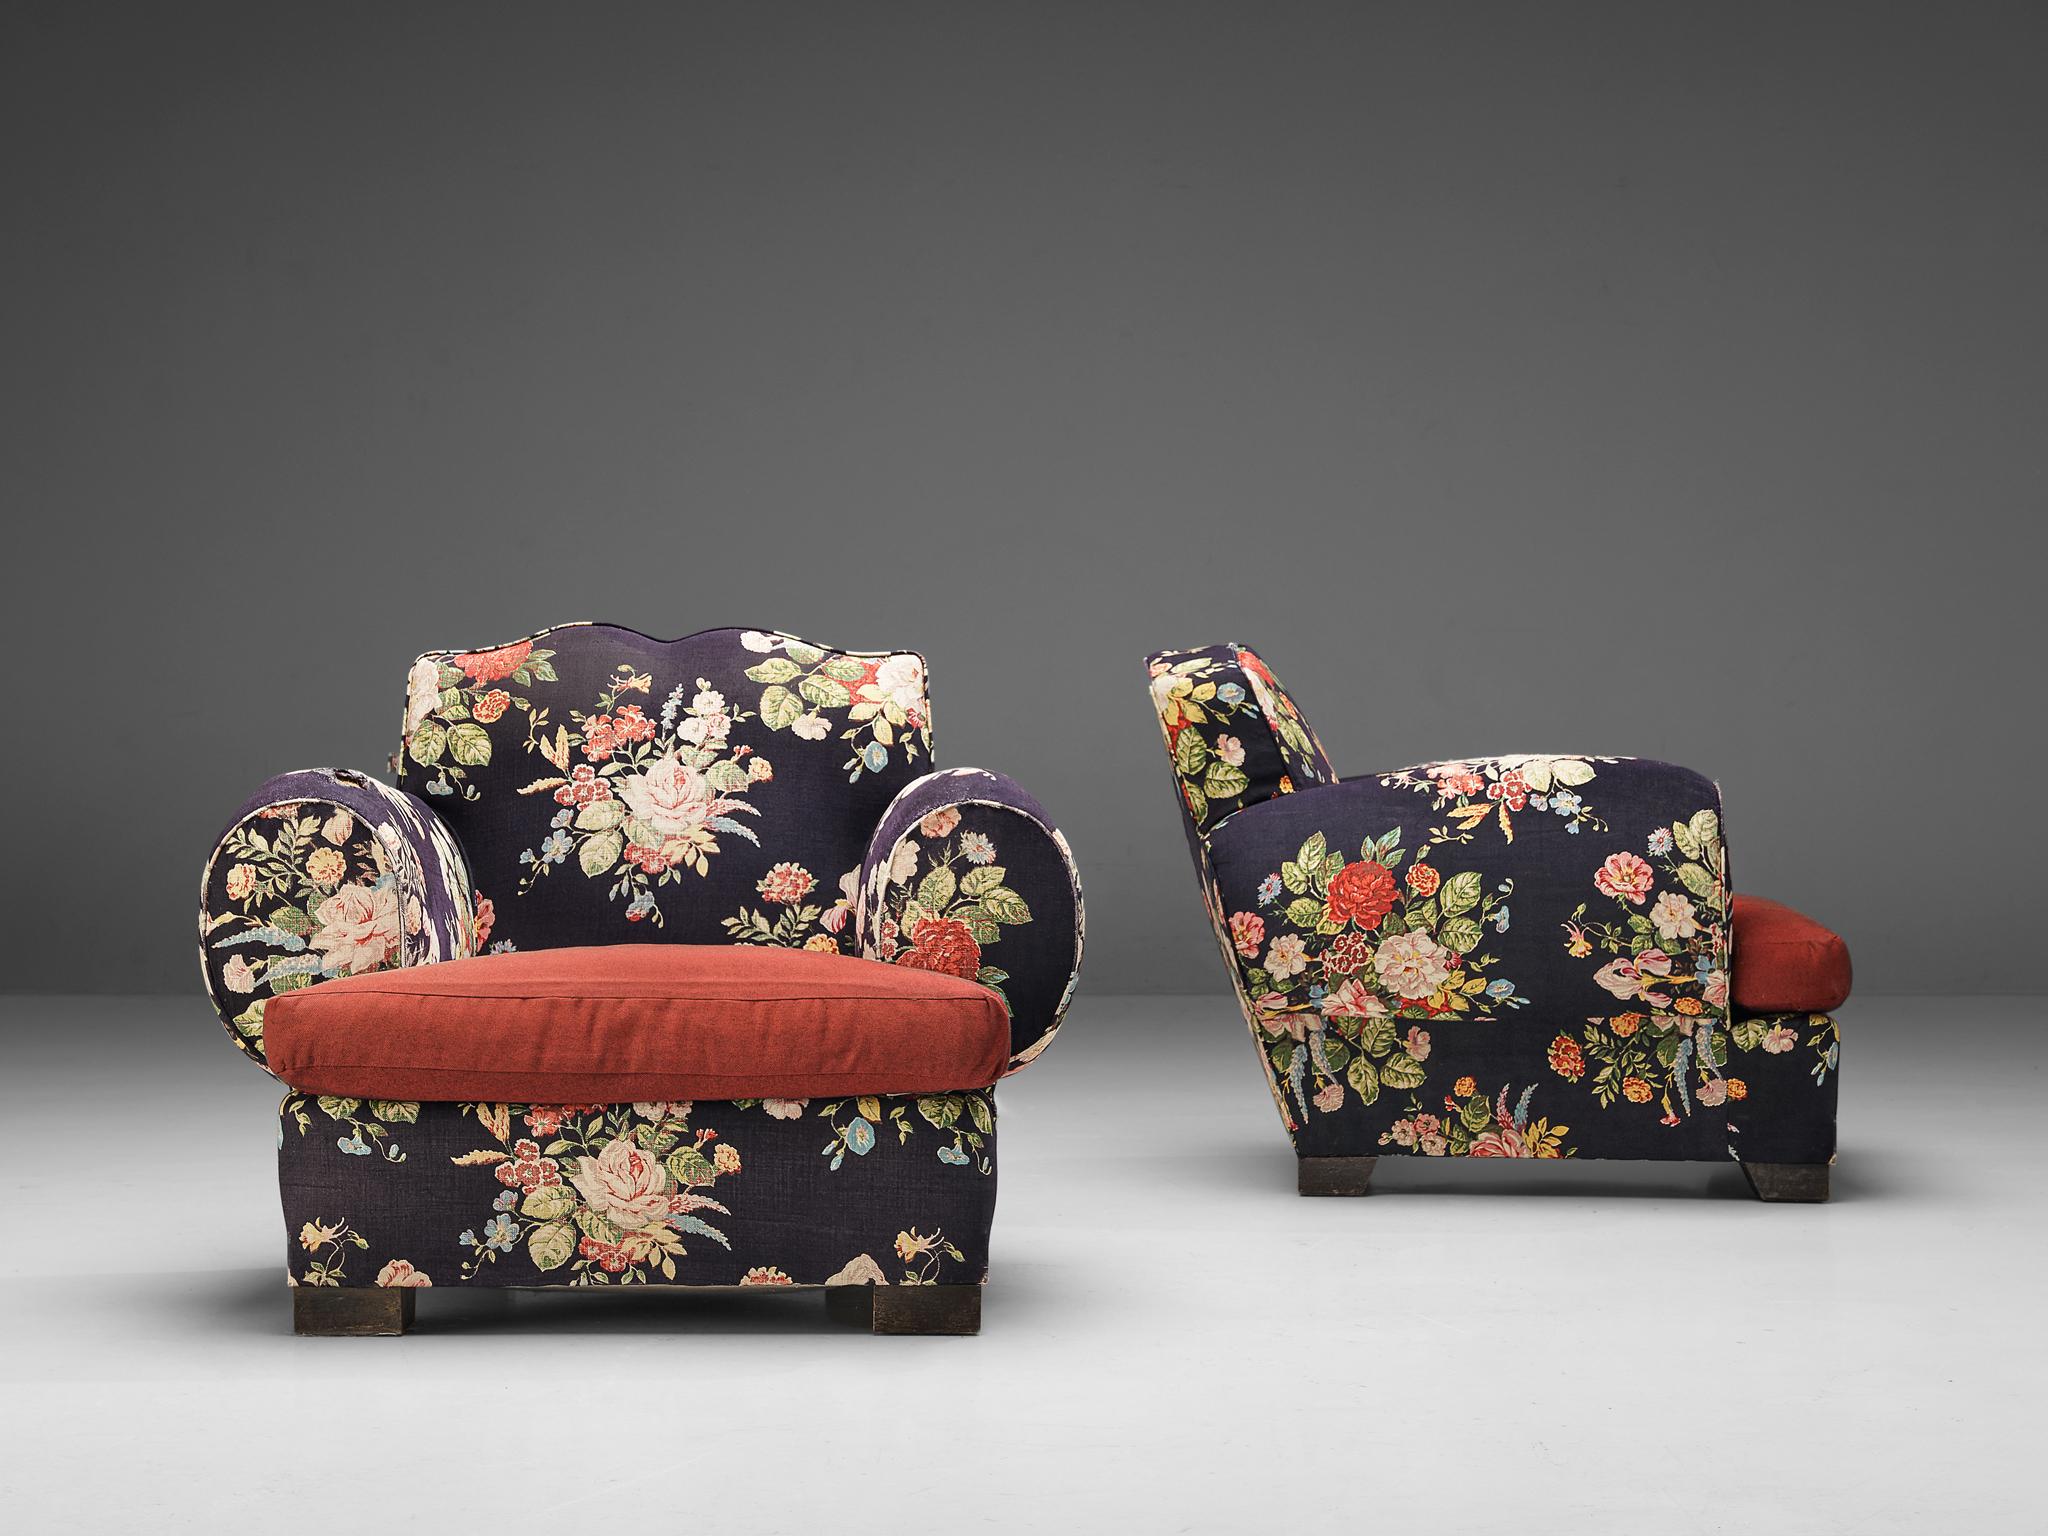 Pair of lounge chairs, fabric, wood, France, 1950s

This pair of lounge chairs shows strong resemblance to the aesthetics of the French designer Maurice Rinck (1902-1983). For instance, the subtle yet elegant curves of the backrest and the large,